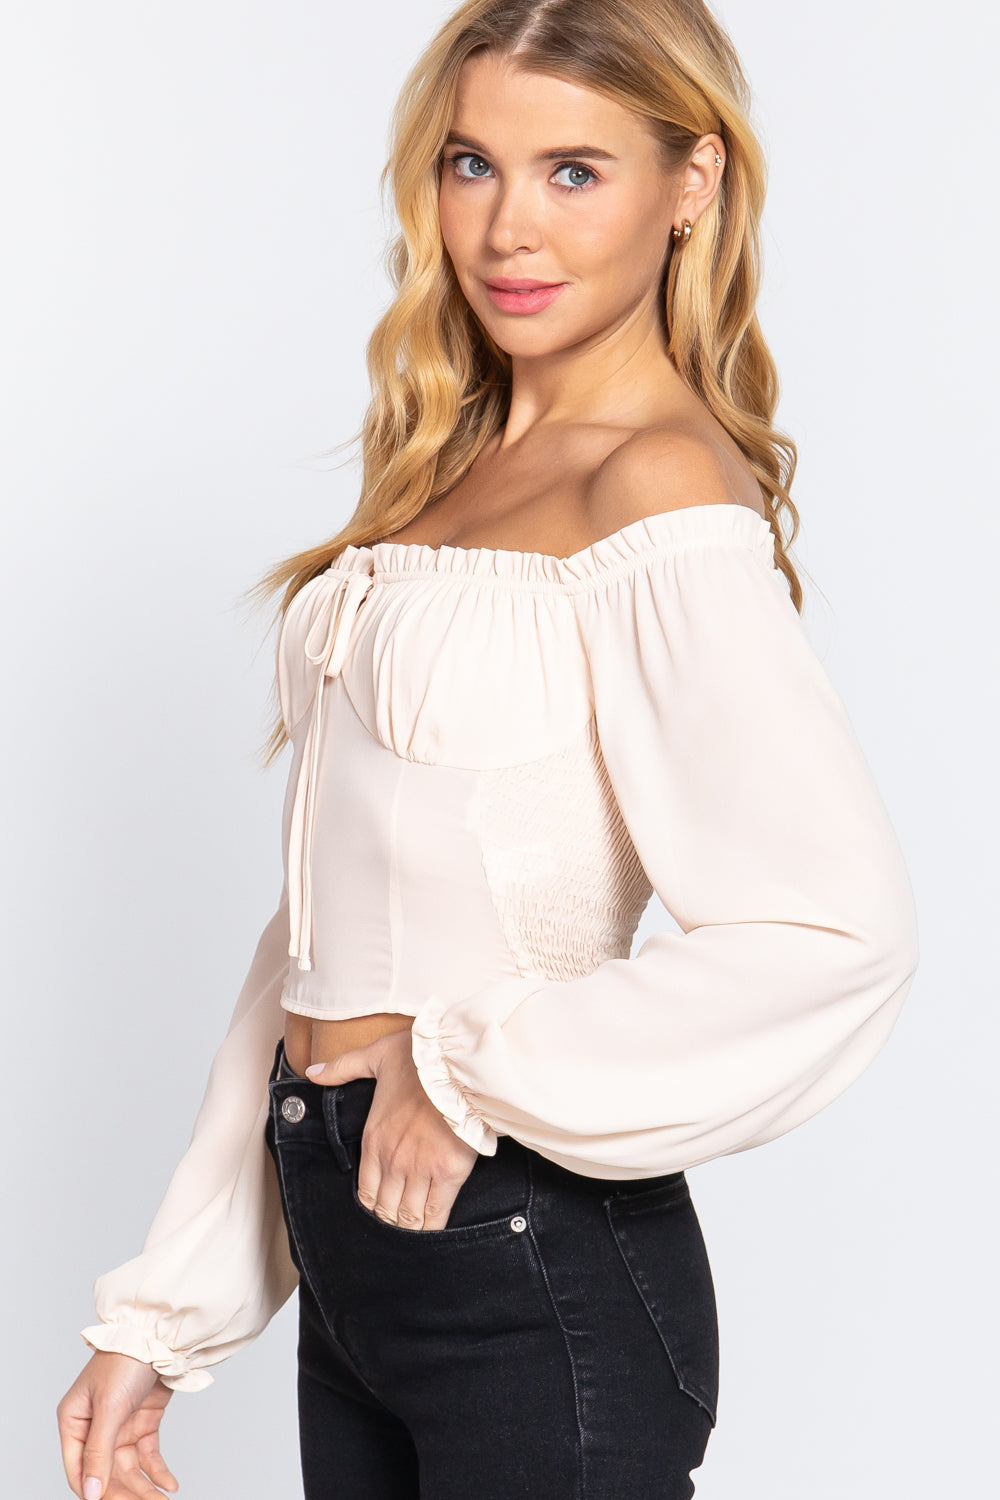 Off Shoulder Smocking Woven Top - 3 colors - women's shirt at TFC&H Co.